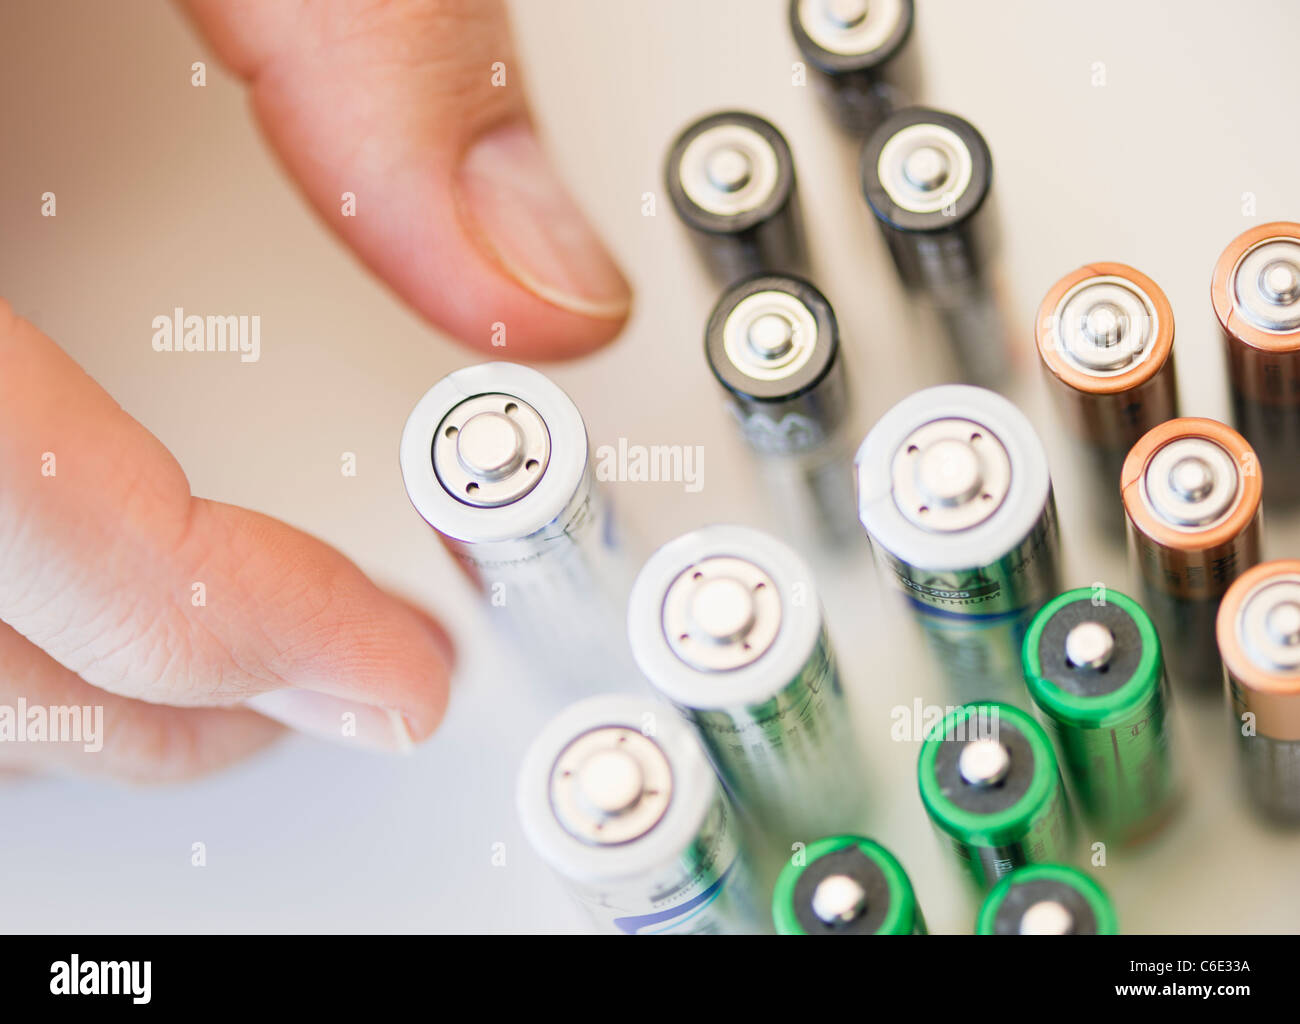 Hand holding batteries Stock Photo